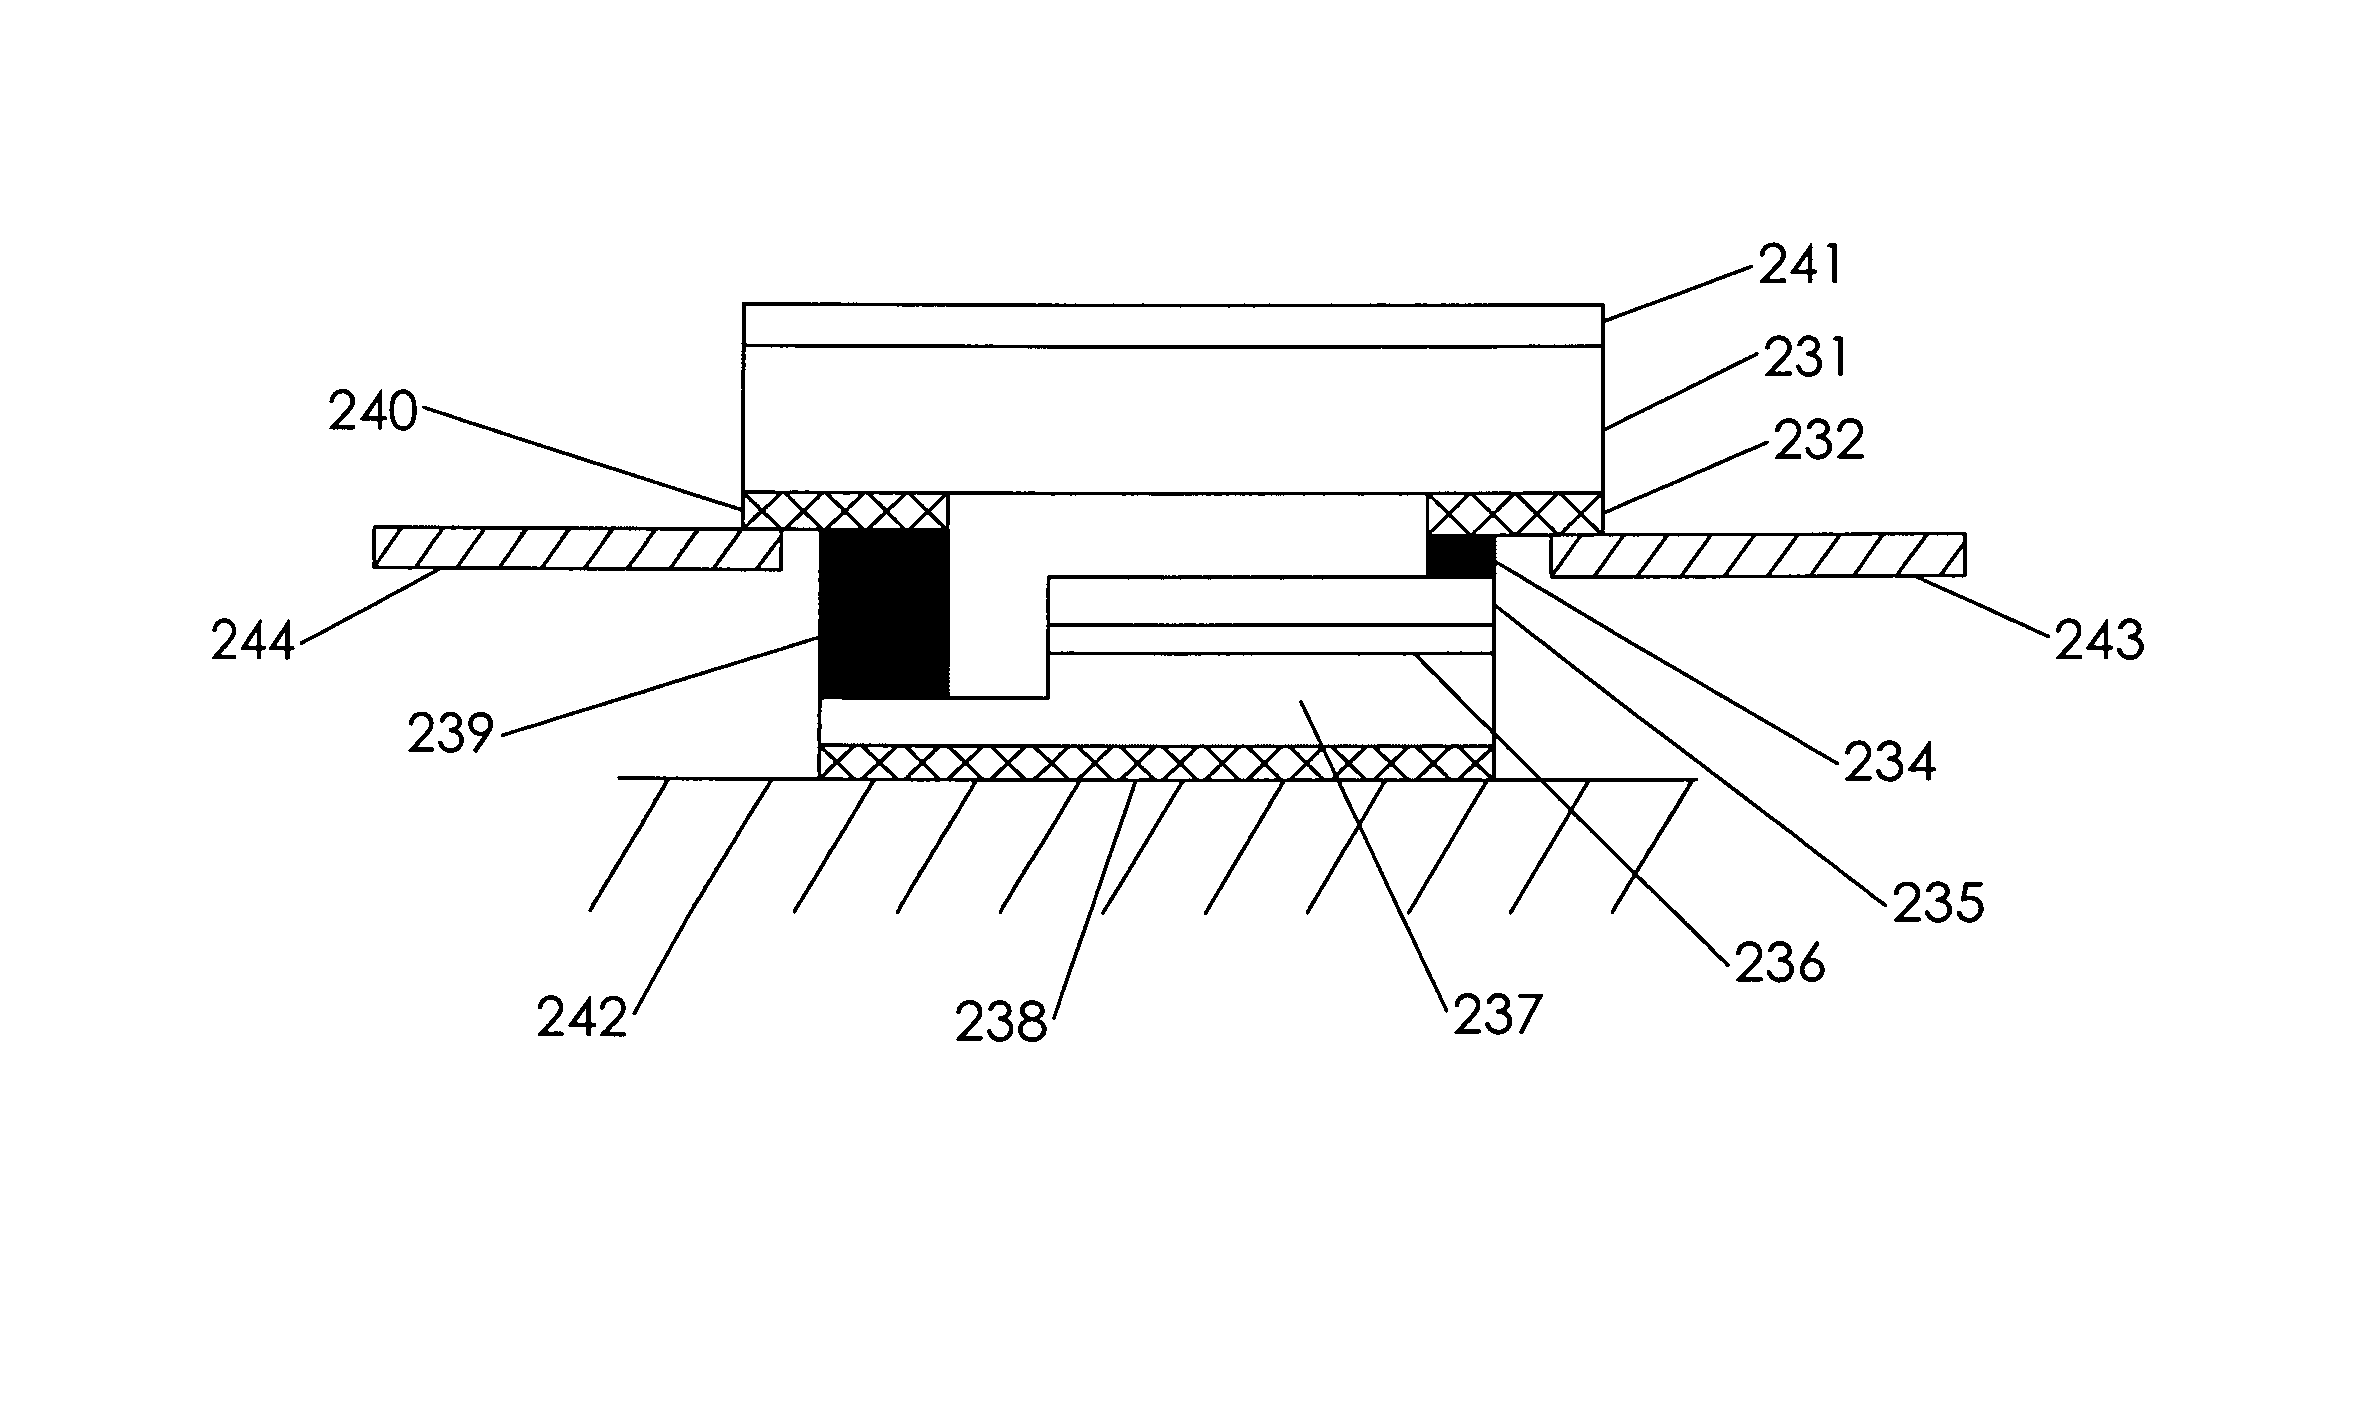 Flexible semiconductor devices based on flexible freestanding epitaxial elements